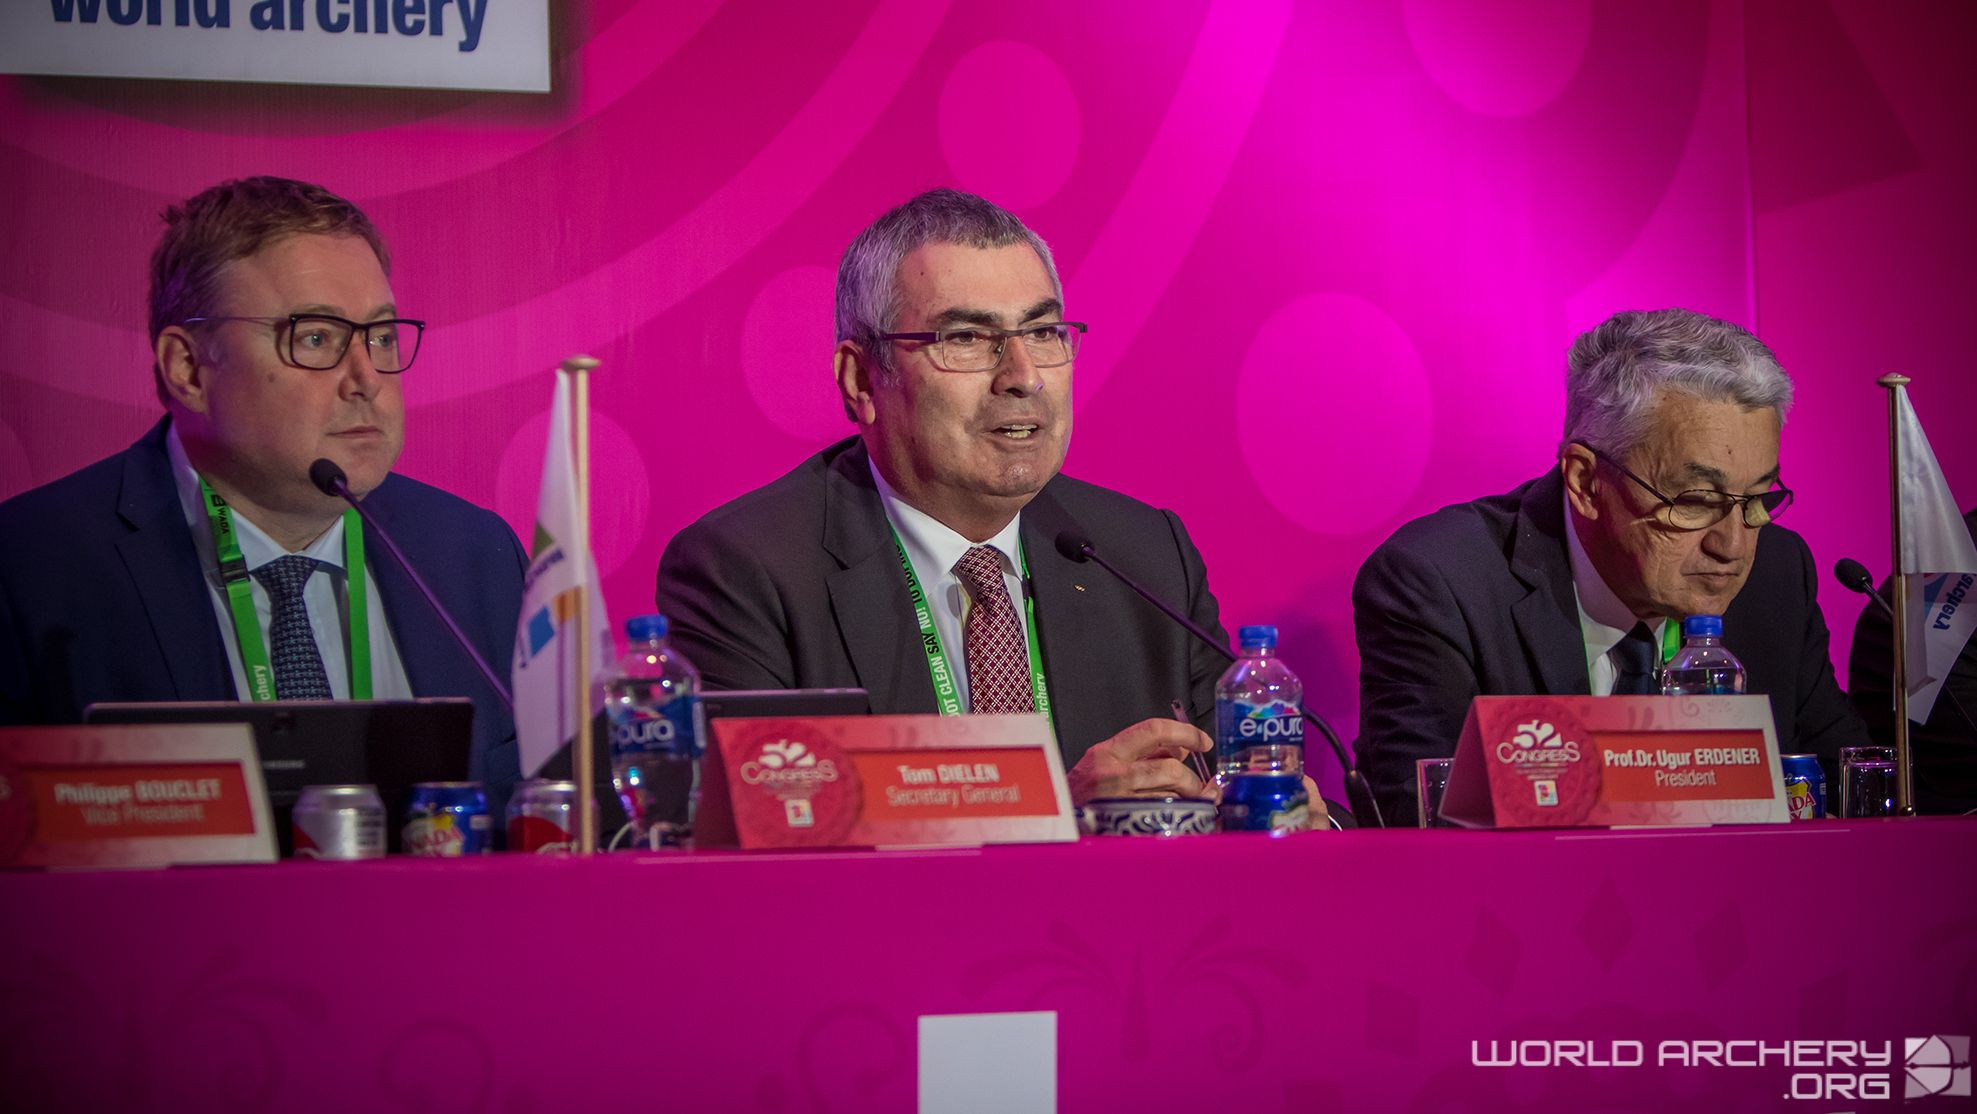 Uğur Erdener, centre, has been President of World Archery since 2005, one of several high-ranking positions he holds in the Olympic Movement, including vice-president of the IOC and head of the Turkish Olympic Committee ©World Archery